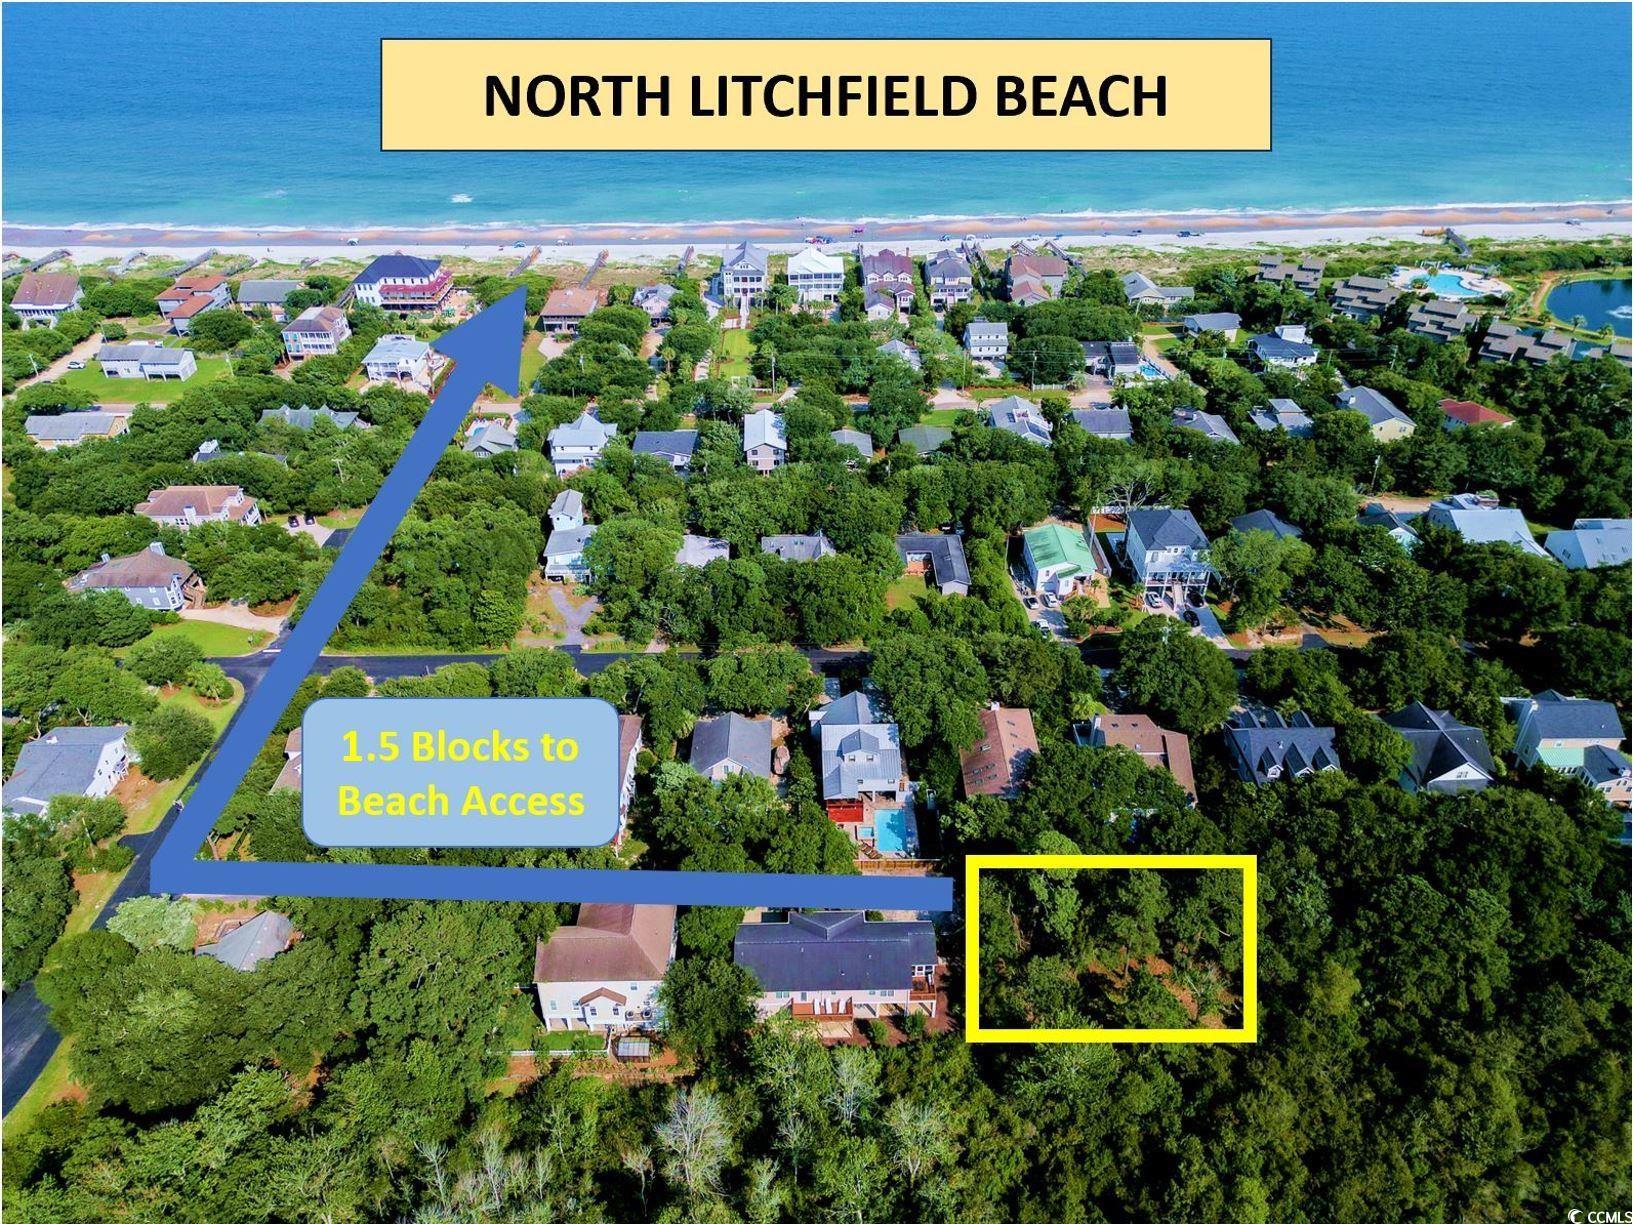 incredible opportunity to own one of the last remining lots in the highly sought after north litchfield community! located at the end of a cul-d-sac and a quick walk to the beach; this setting offers both incredible privacy while still allowing you to live the beach lifestyle. in addition to being a stones throw from the beach, the lot backs up to undisturbed marshlands where nature, peace and incredible sunsets will become a mainstay in your daily living experience.   adding to the ideal setting, the location itself provides numerous attractions for the outdoor lover. while the beach will be your most immediate playground, brookgreen gardens, huntington beach state park , and the waccamaw neck bike bath are all easily accessible from this property. for those looking for to also enjoy the finer things in life, north litchfield is located a few minutes drive from both the outstanding restaurants and boutique shops of both pawleys island and murrells inlet. opportunities to own a piece of paradise are fleeting, so secure yours now while you have the chance!